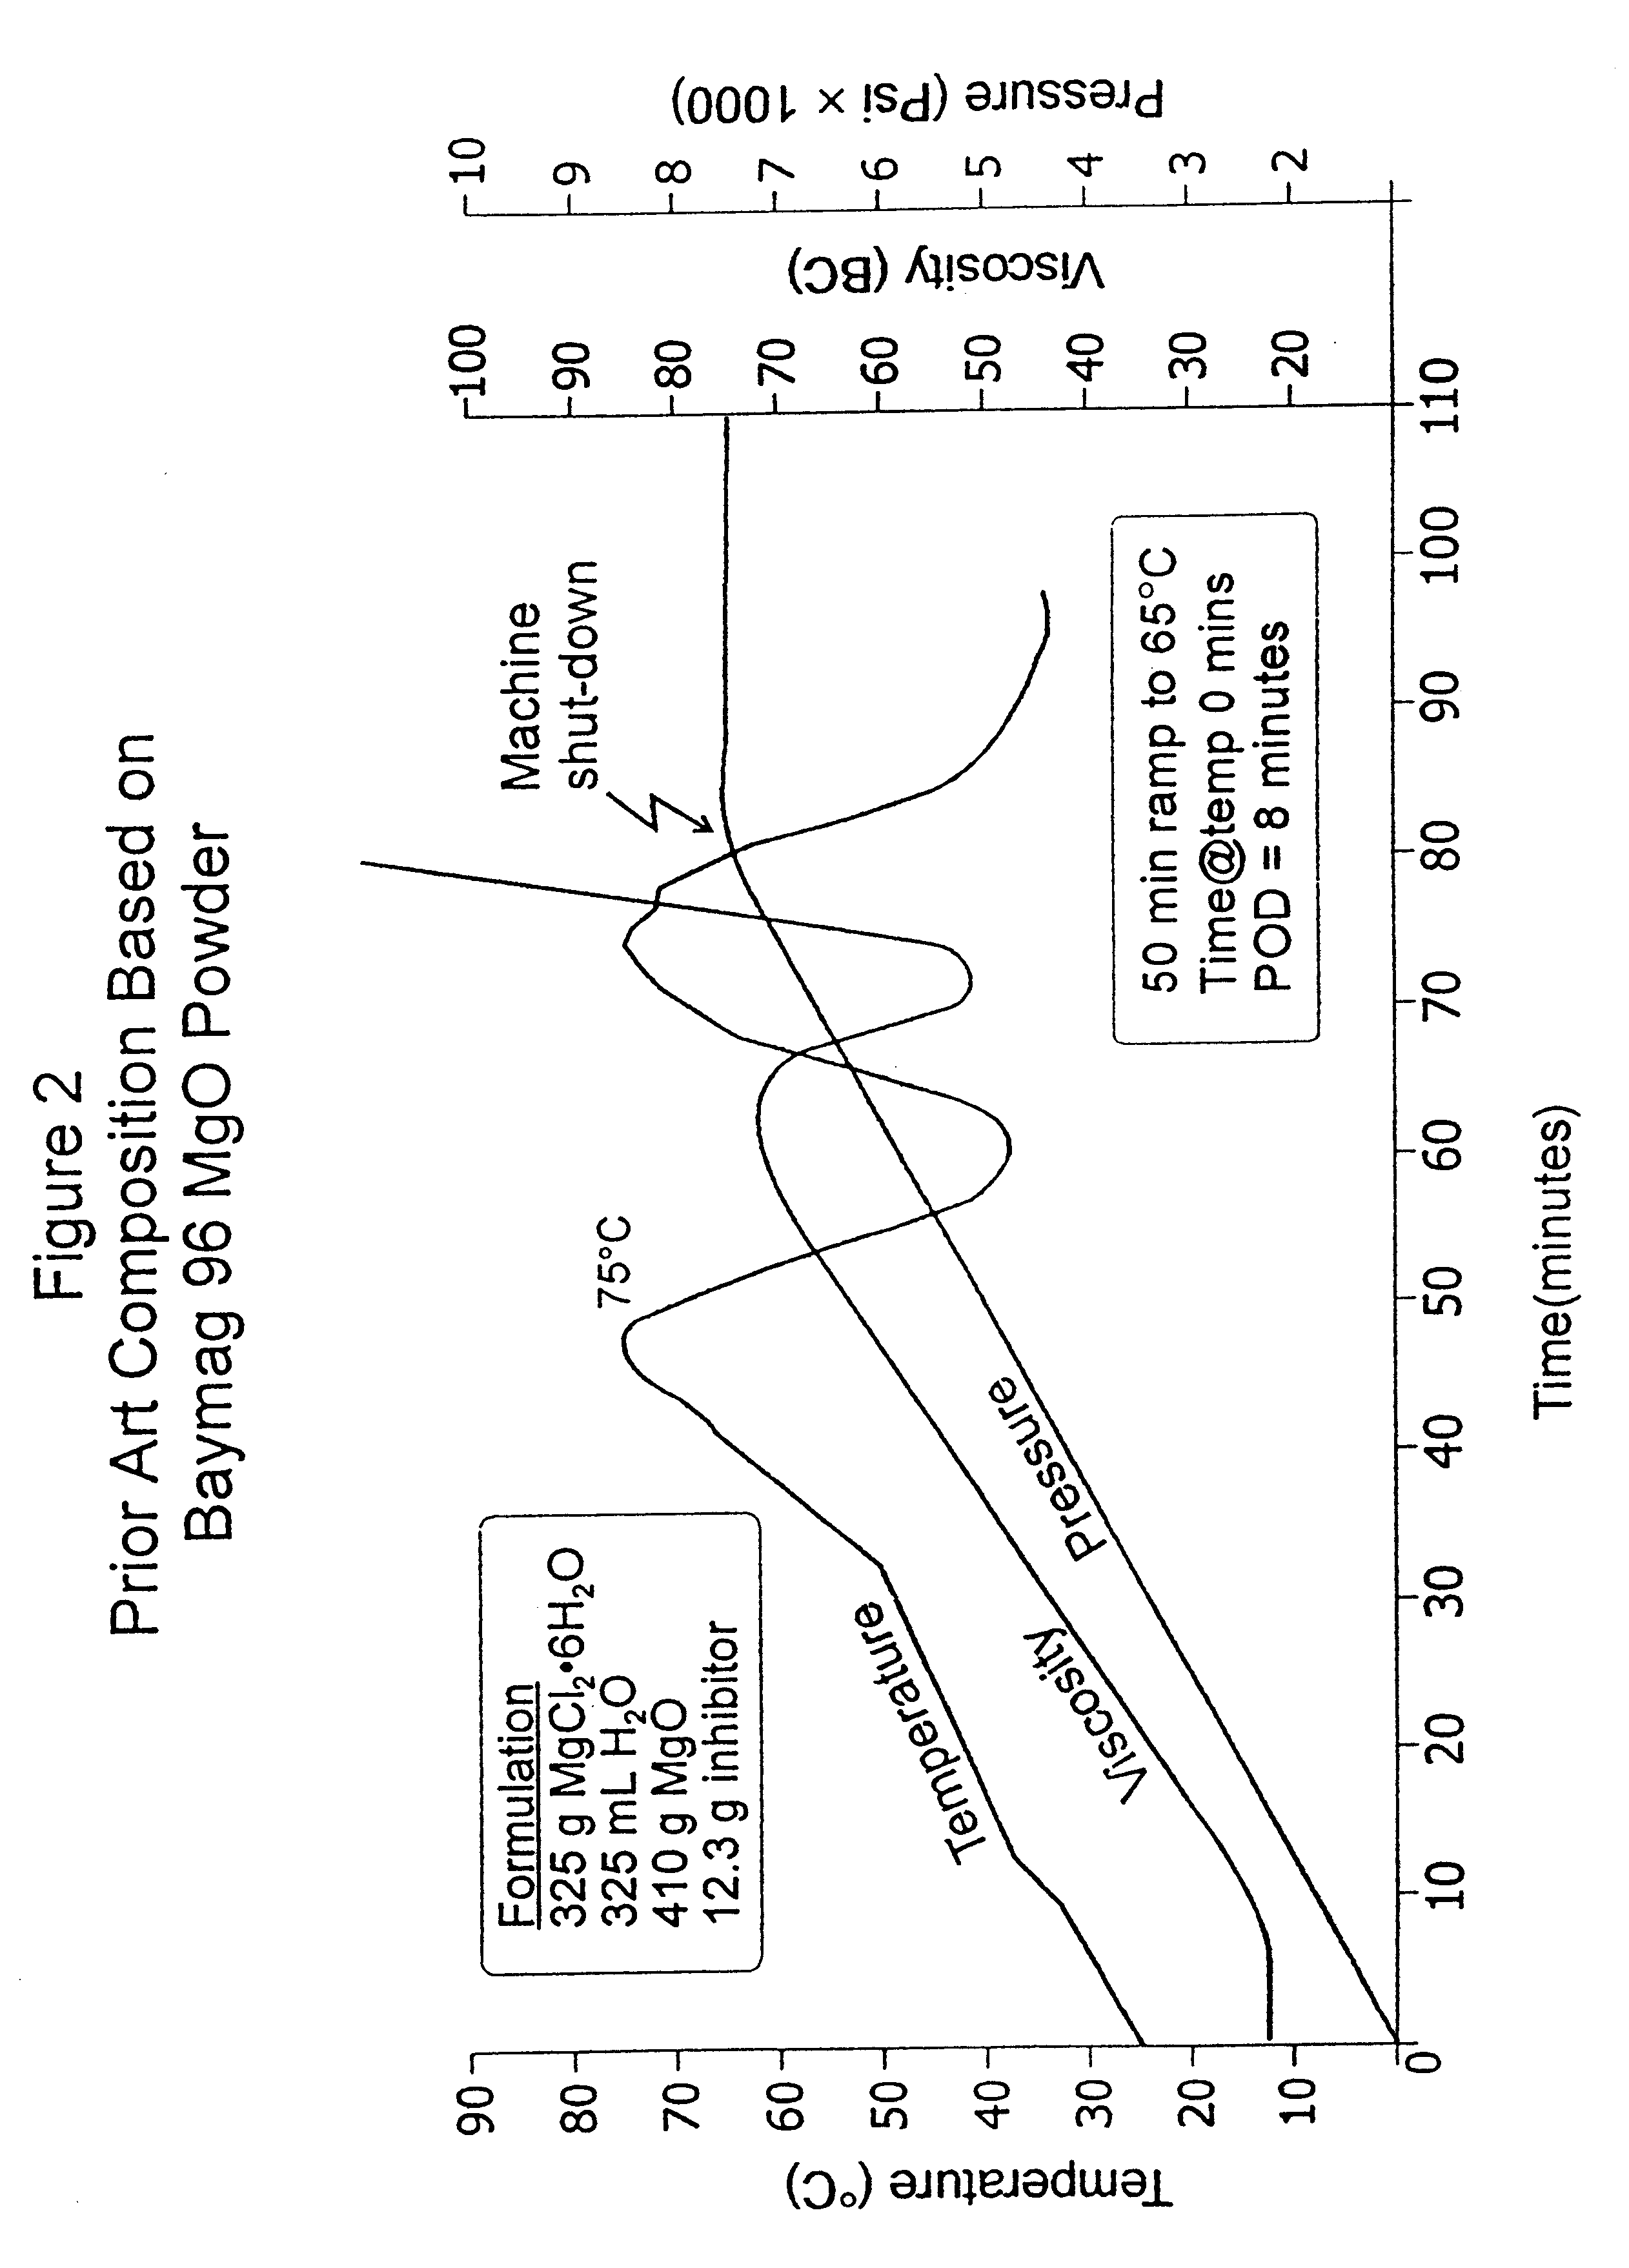 Composition for controlling wellbore fluid and gas invasion and method for using same